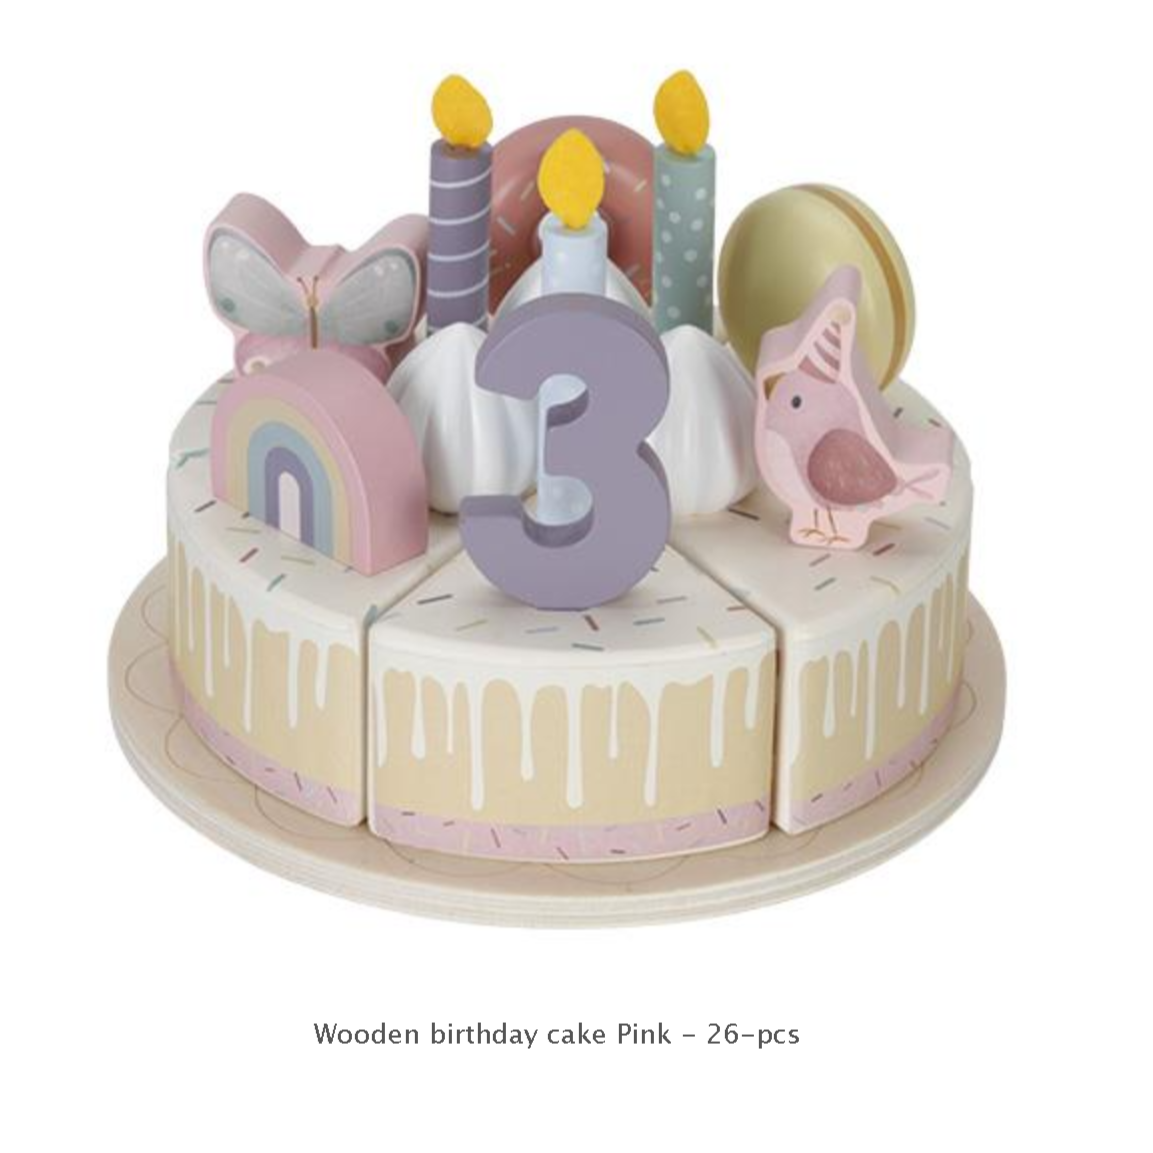 wooden birthday vcake with rainbows, robins, butterflies, donughts and macaroons to decorate , wooden numbers 1-5 and birthday candles